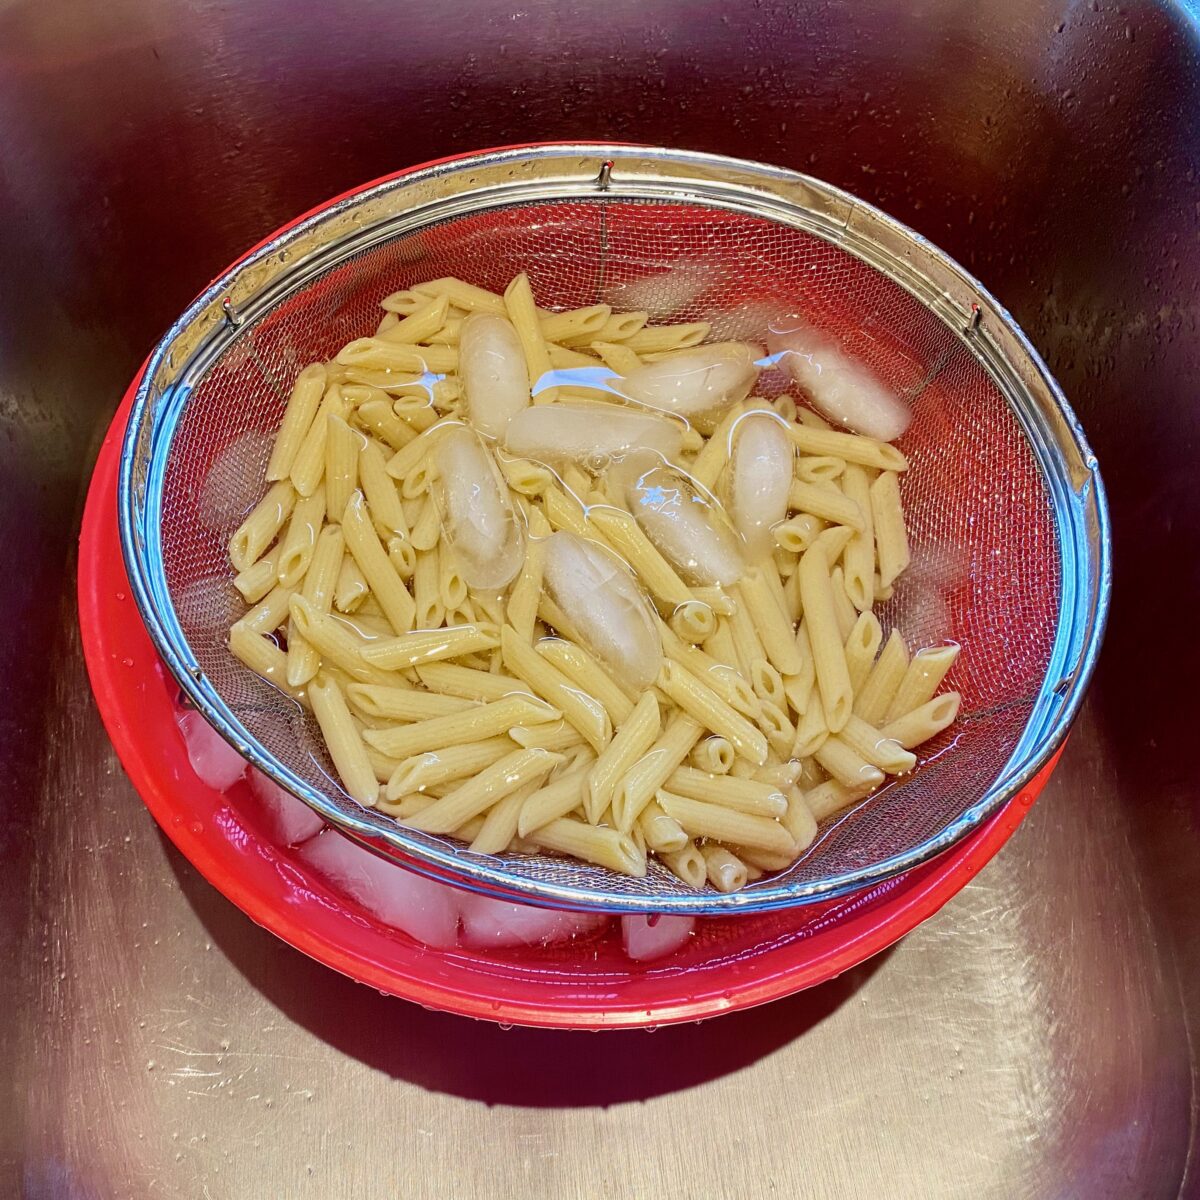 The colander of pasta cooling in a bowl of ice water.